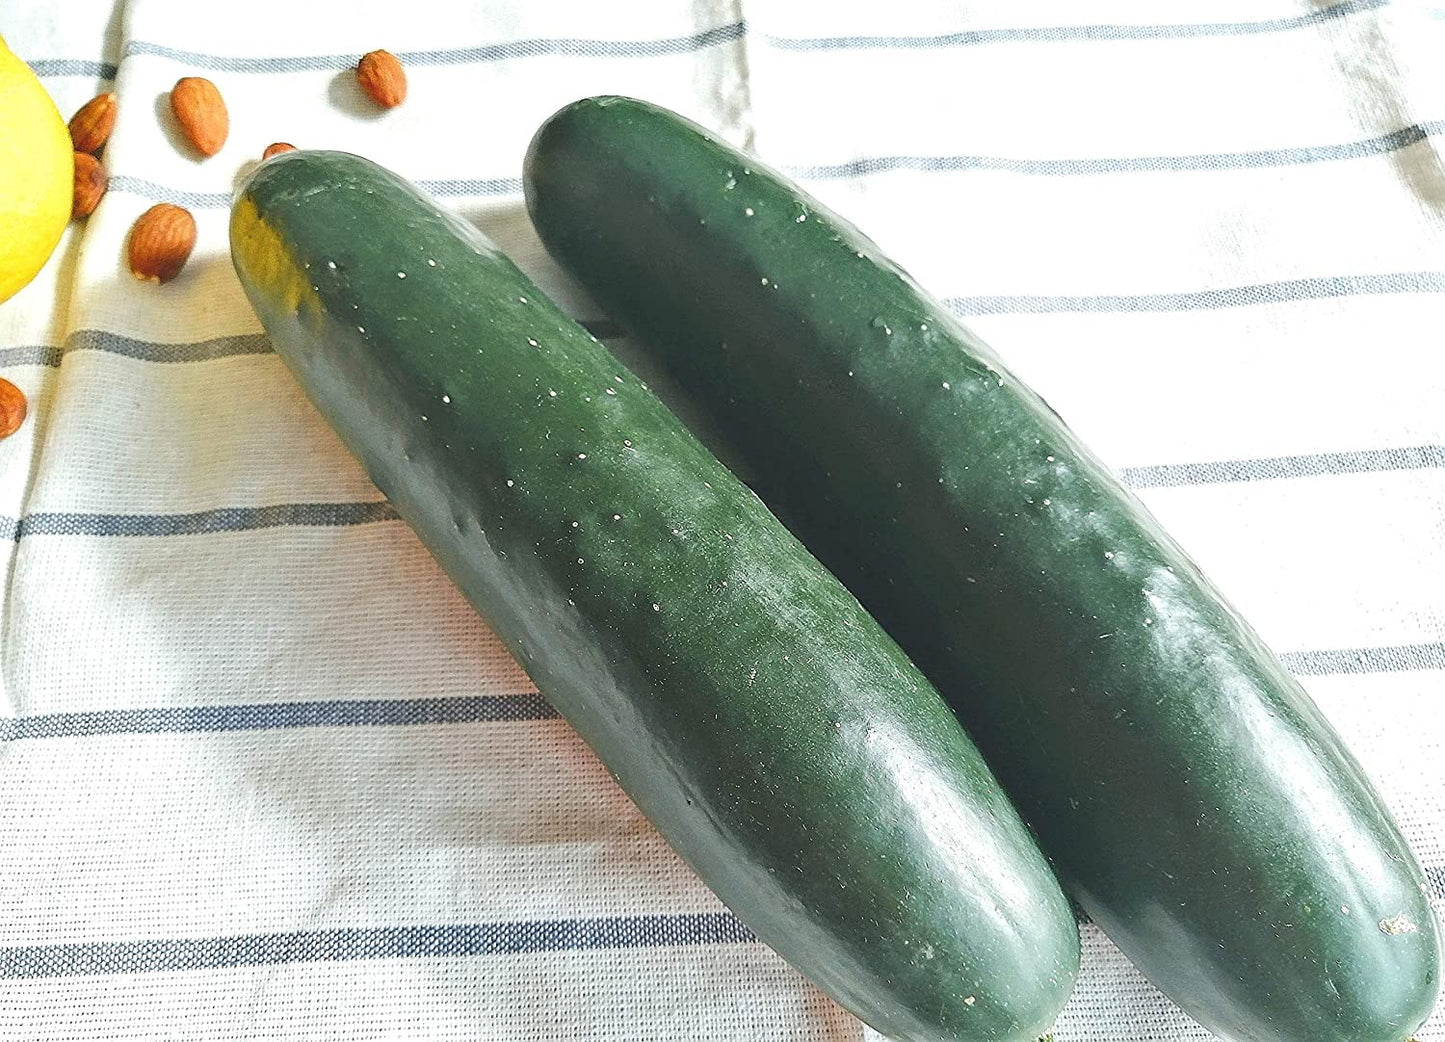 Hundredfold Marketmore 76 Open-pollinated Slicing Cucumber 50 Vegetable Seeds - Cucumis sativus Non-GMO, Classic Flavor & High Yield